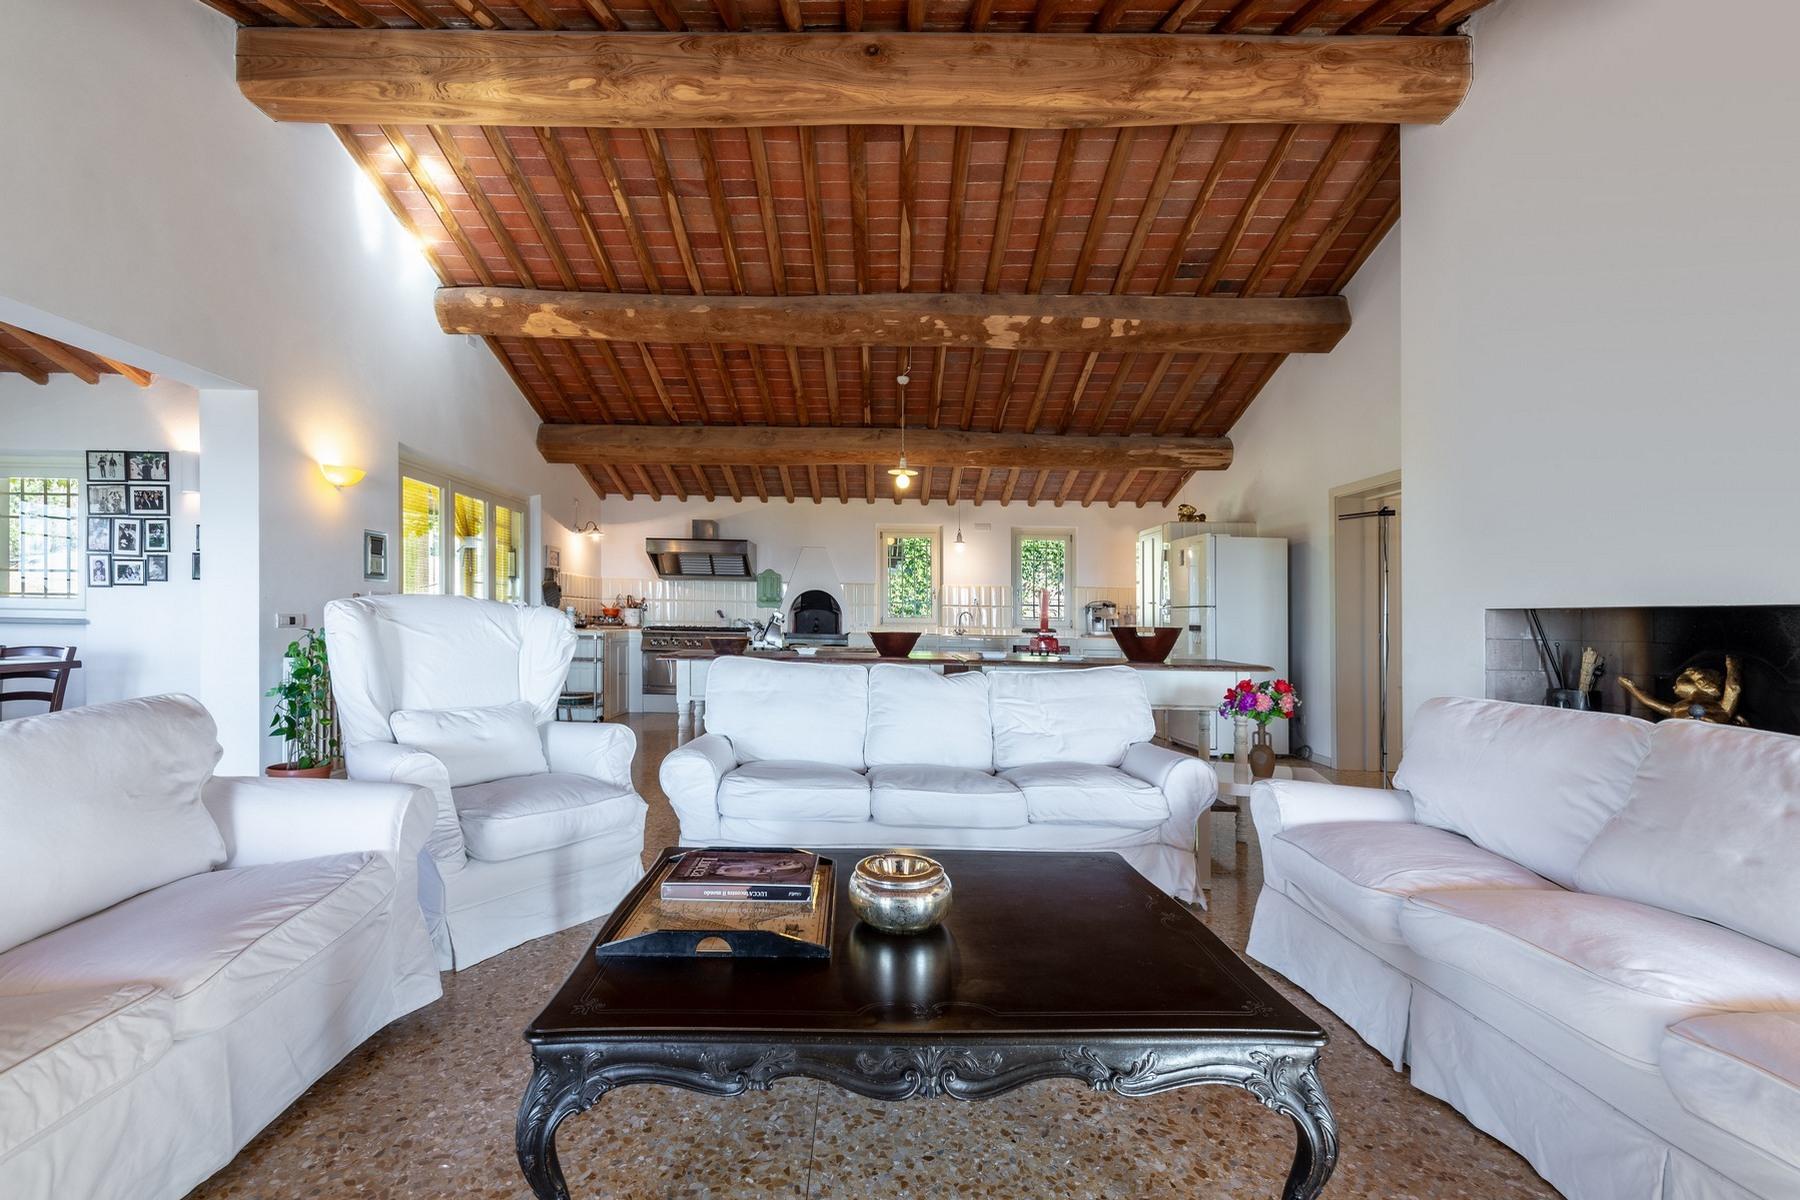 Superb villa with pool on the hills of Lucca - 6